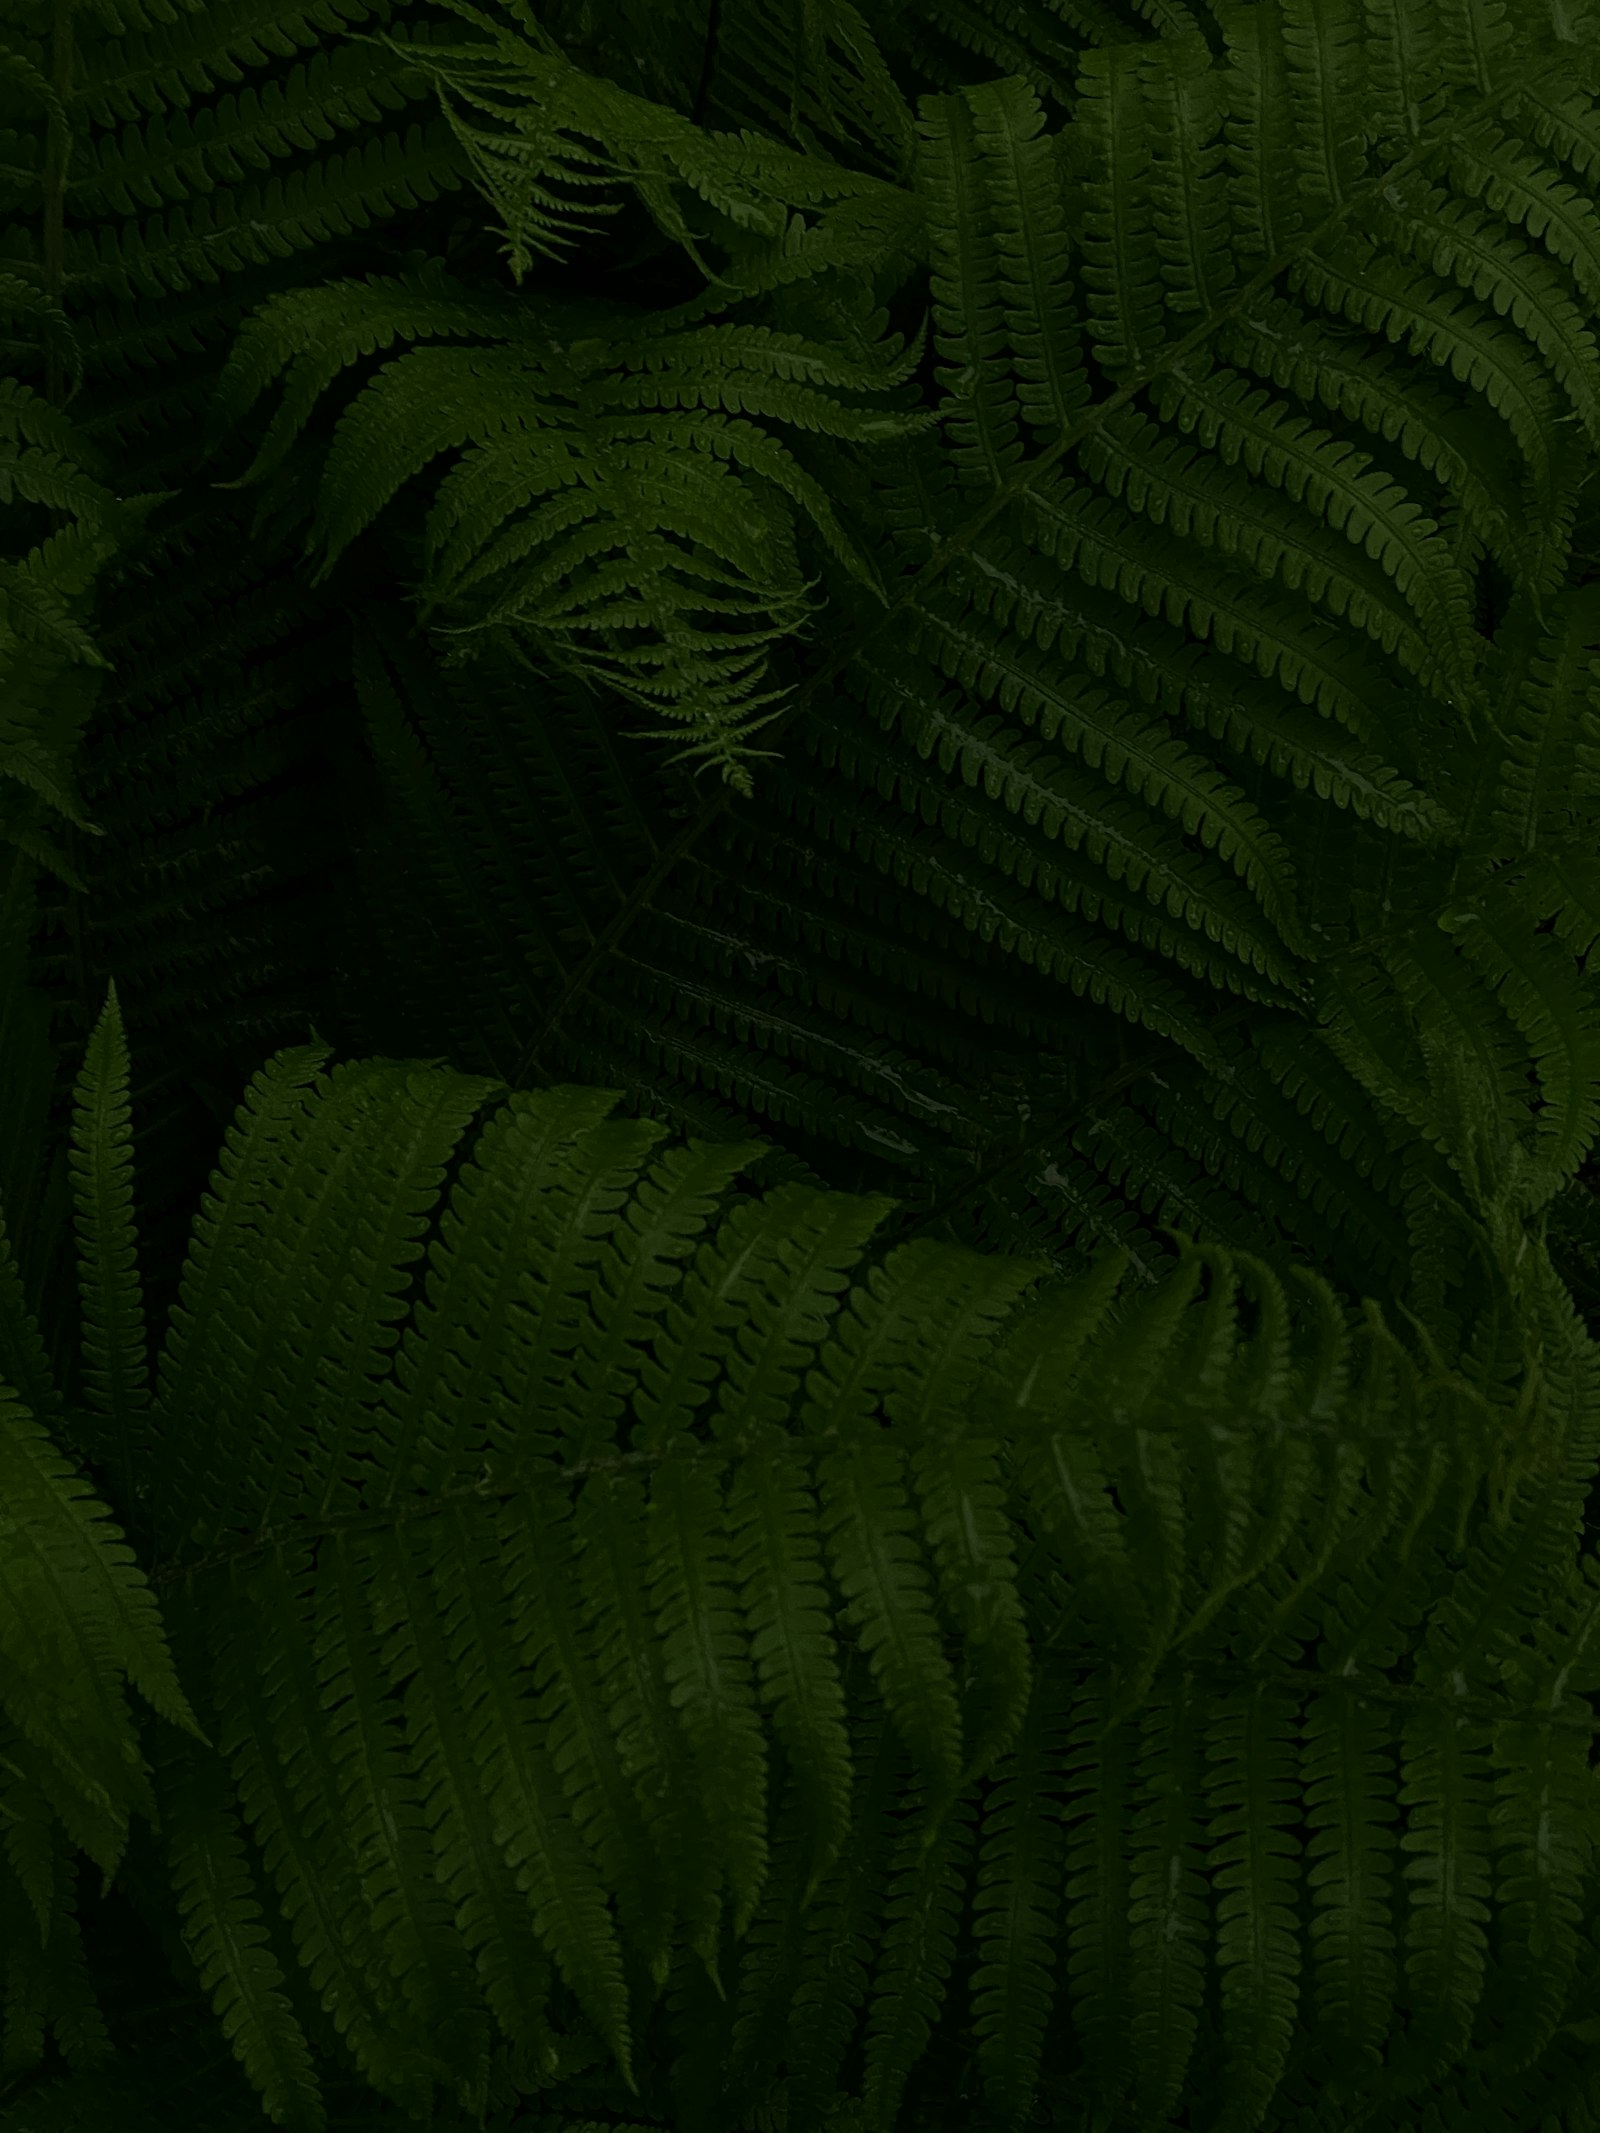 iPhone 11 Pro Max back triple camera 6mm f/2 sample photo. Green fern plant in photography